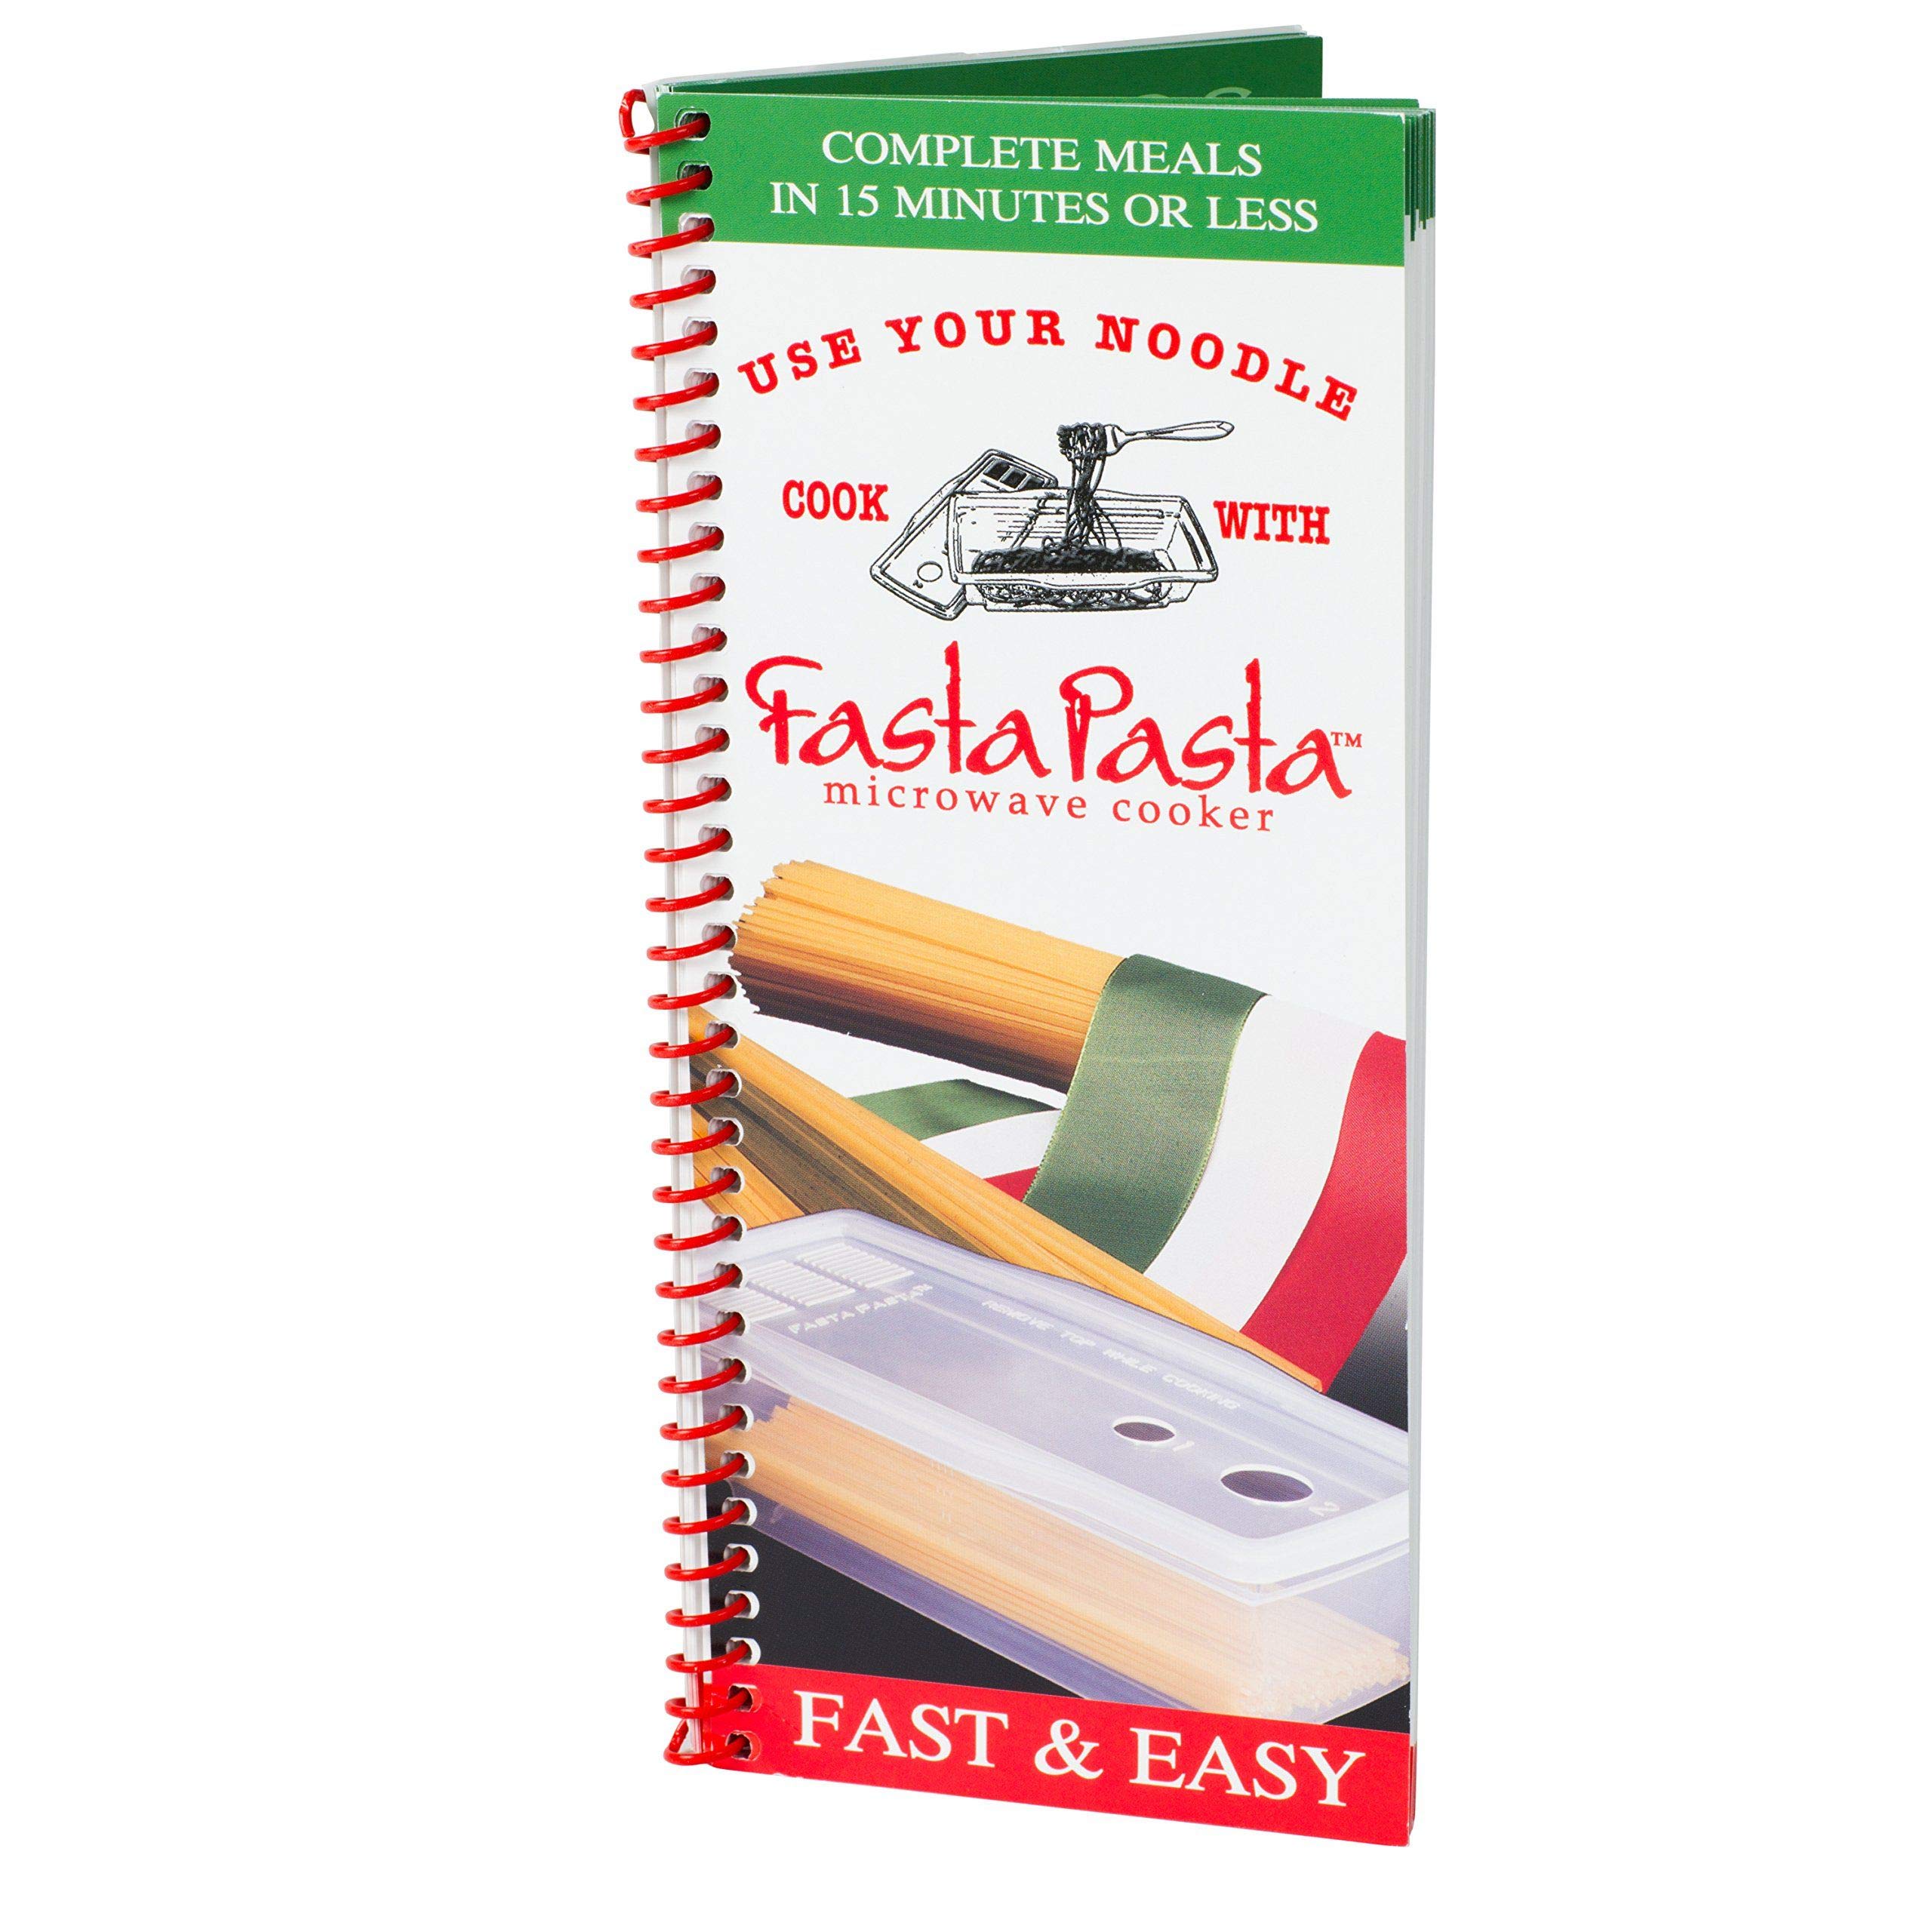 Microwave Pasta Cooker- Original Fasta Pasta w Spiral Cookbook- Microwave Spaghetti Cooker Quickly Cooks Up to 4 Servings- No Mess, Sticking or Waiting For Boil- Perfect Al Dente Pasta